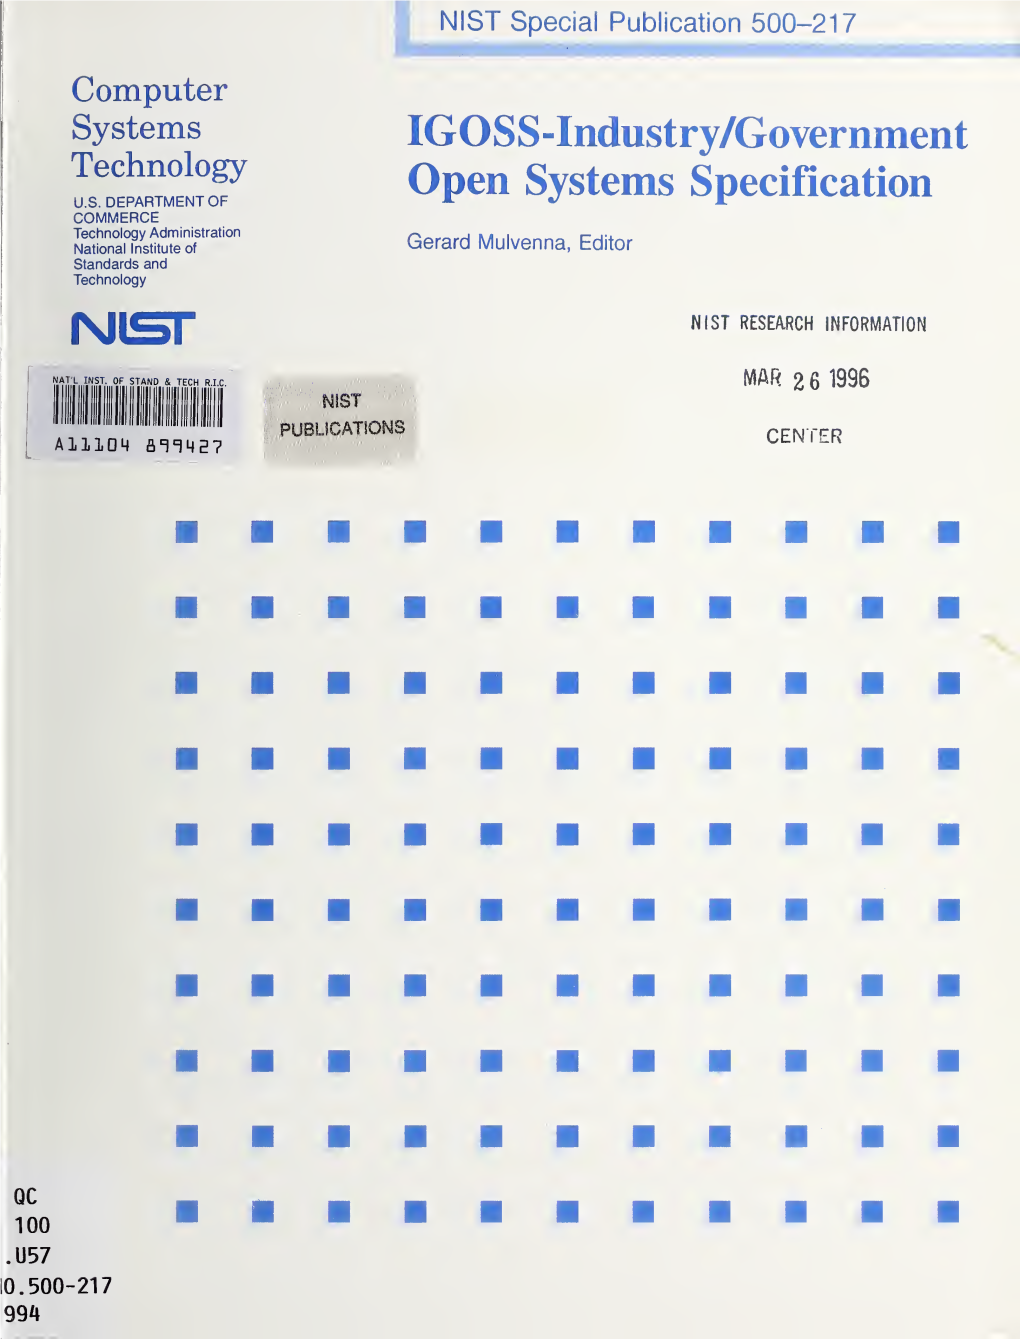 IGOSS-Industry/Government Open Systems Specification